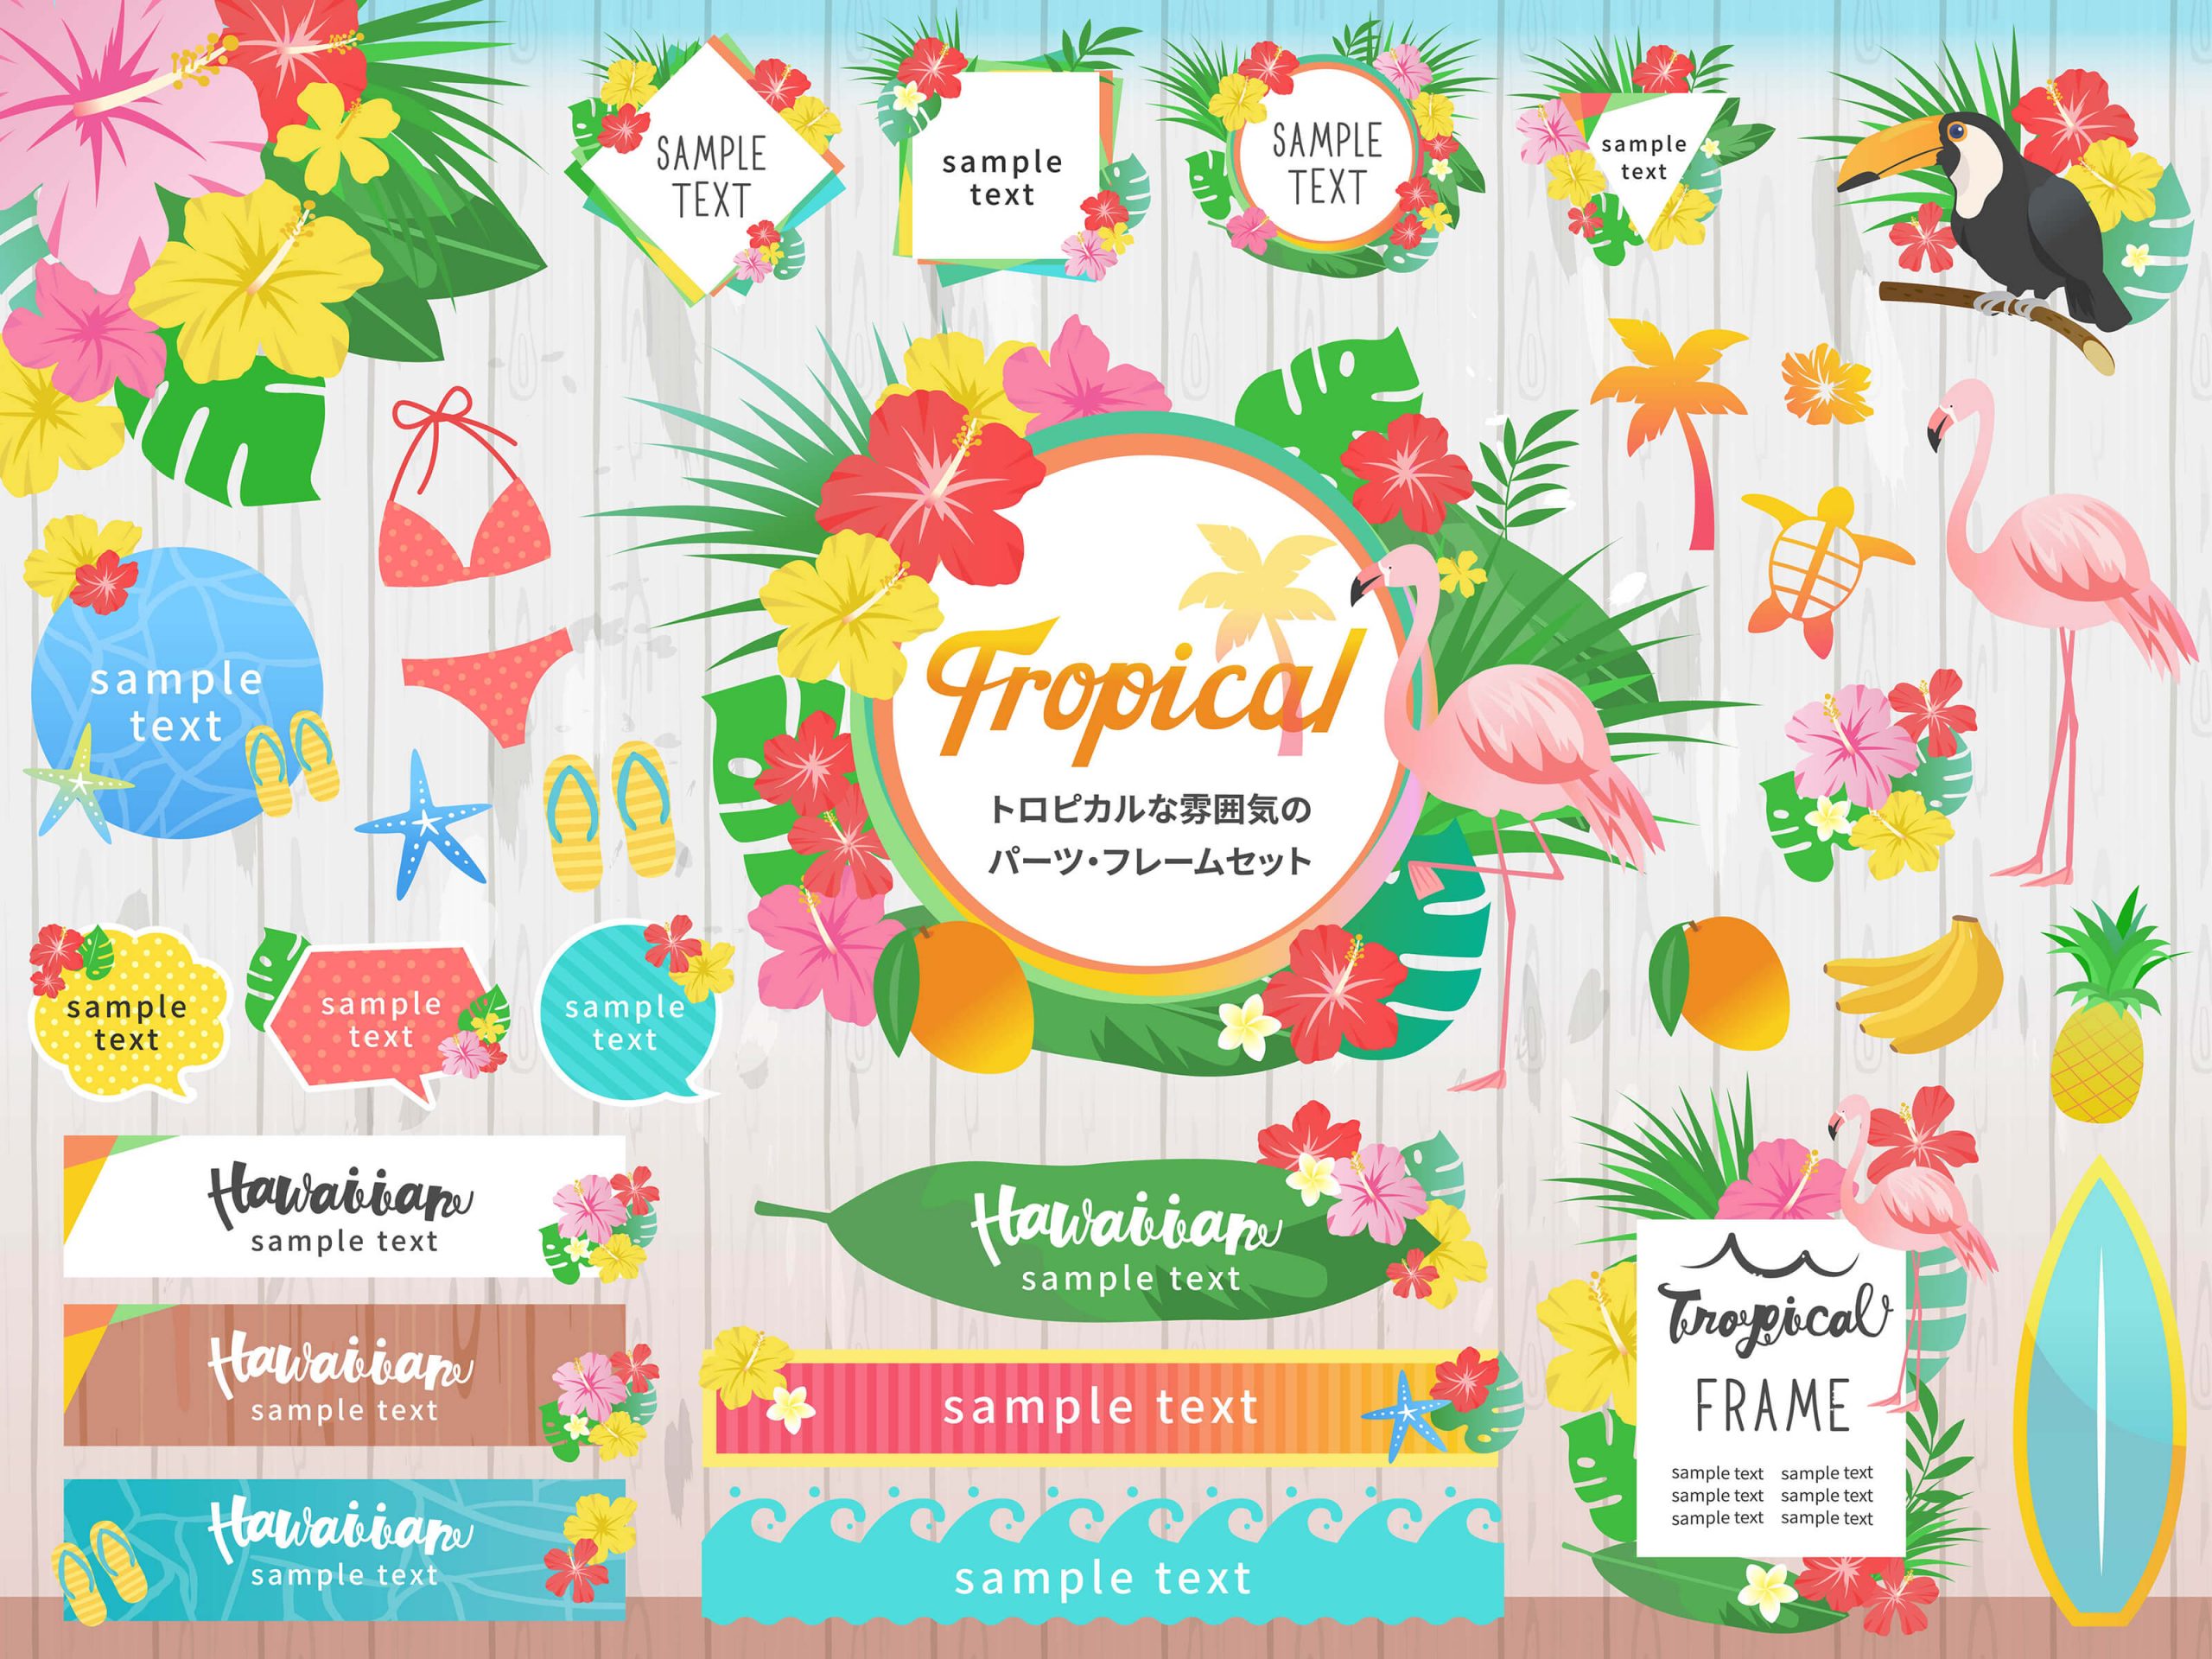 15+ Awesome Royalty-free Tropical Clipart for your Designs